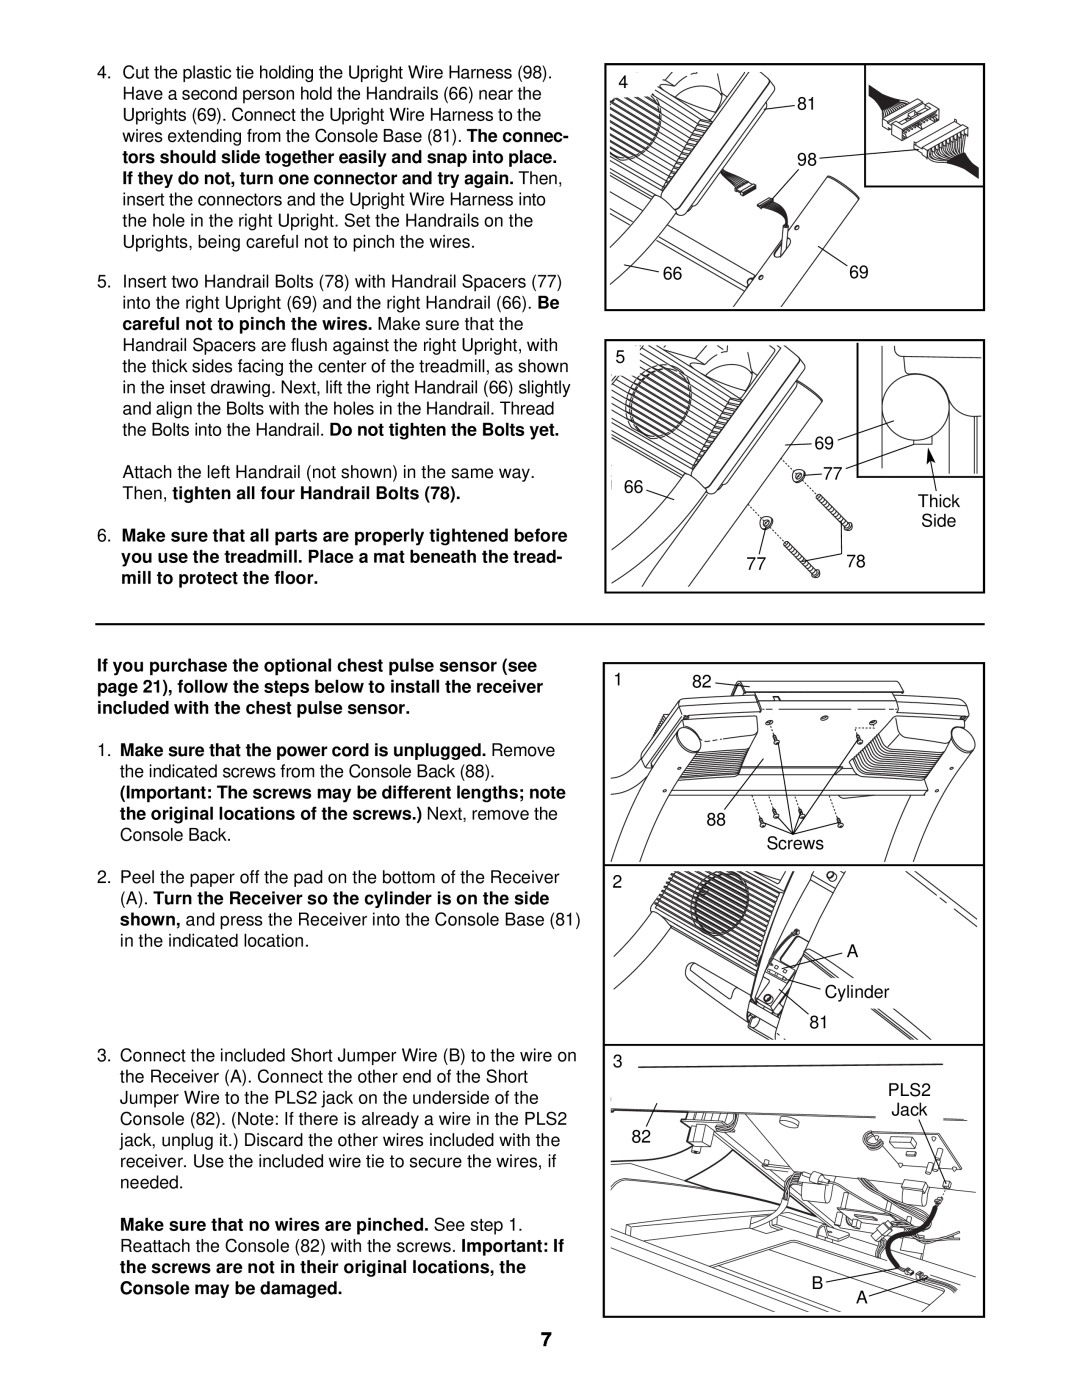 NordicTrack NTL99030 user manual tighten all four Handrail Bolts, mill to protect the floor, shown, Console may be damaged 